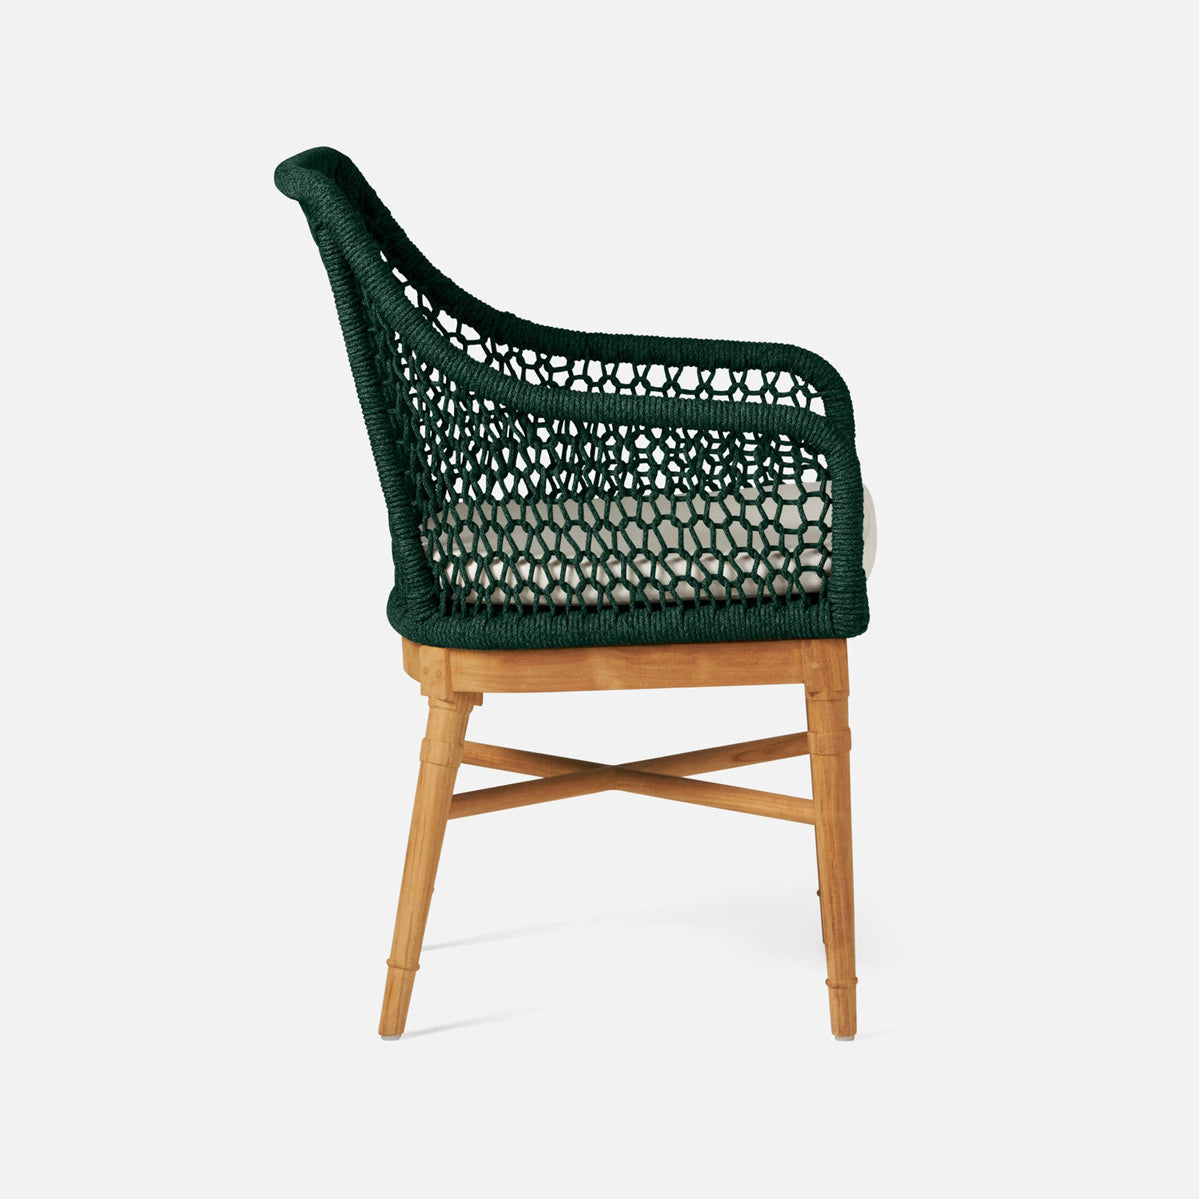 Made Goods Chadwick Woven Rope Outdoor Arm Chair in Garonne Leather